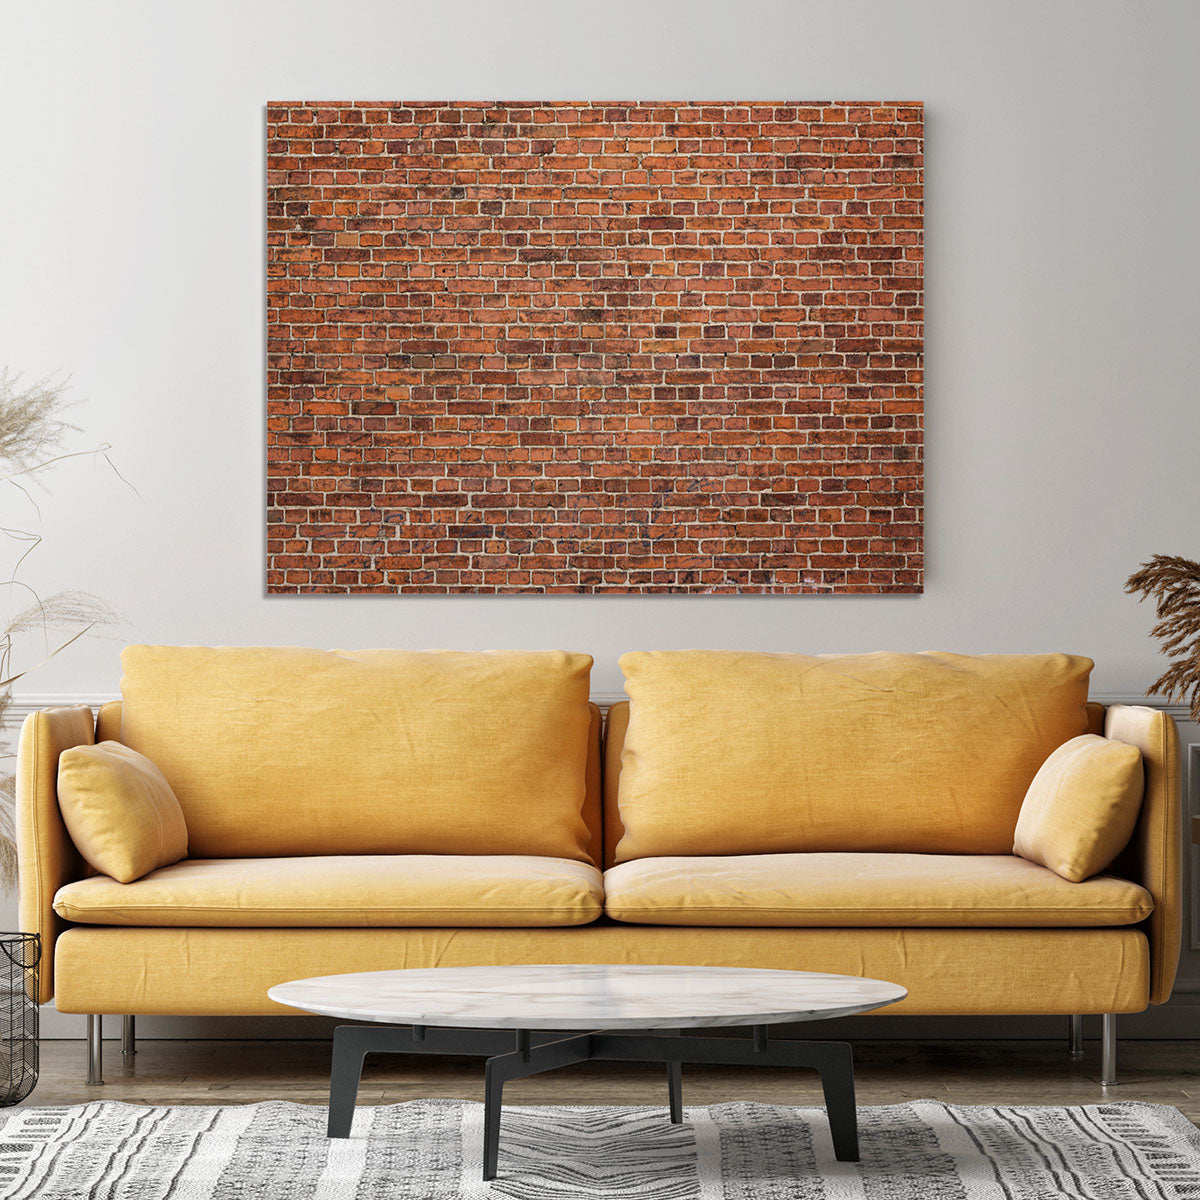 Grunge red brick wall Canvas Print or Poster - Canvas Art Rocks - 4